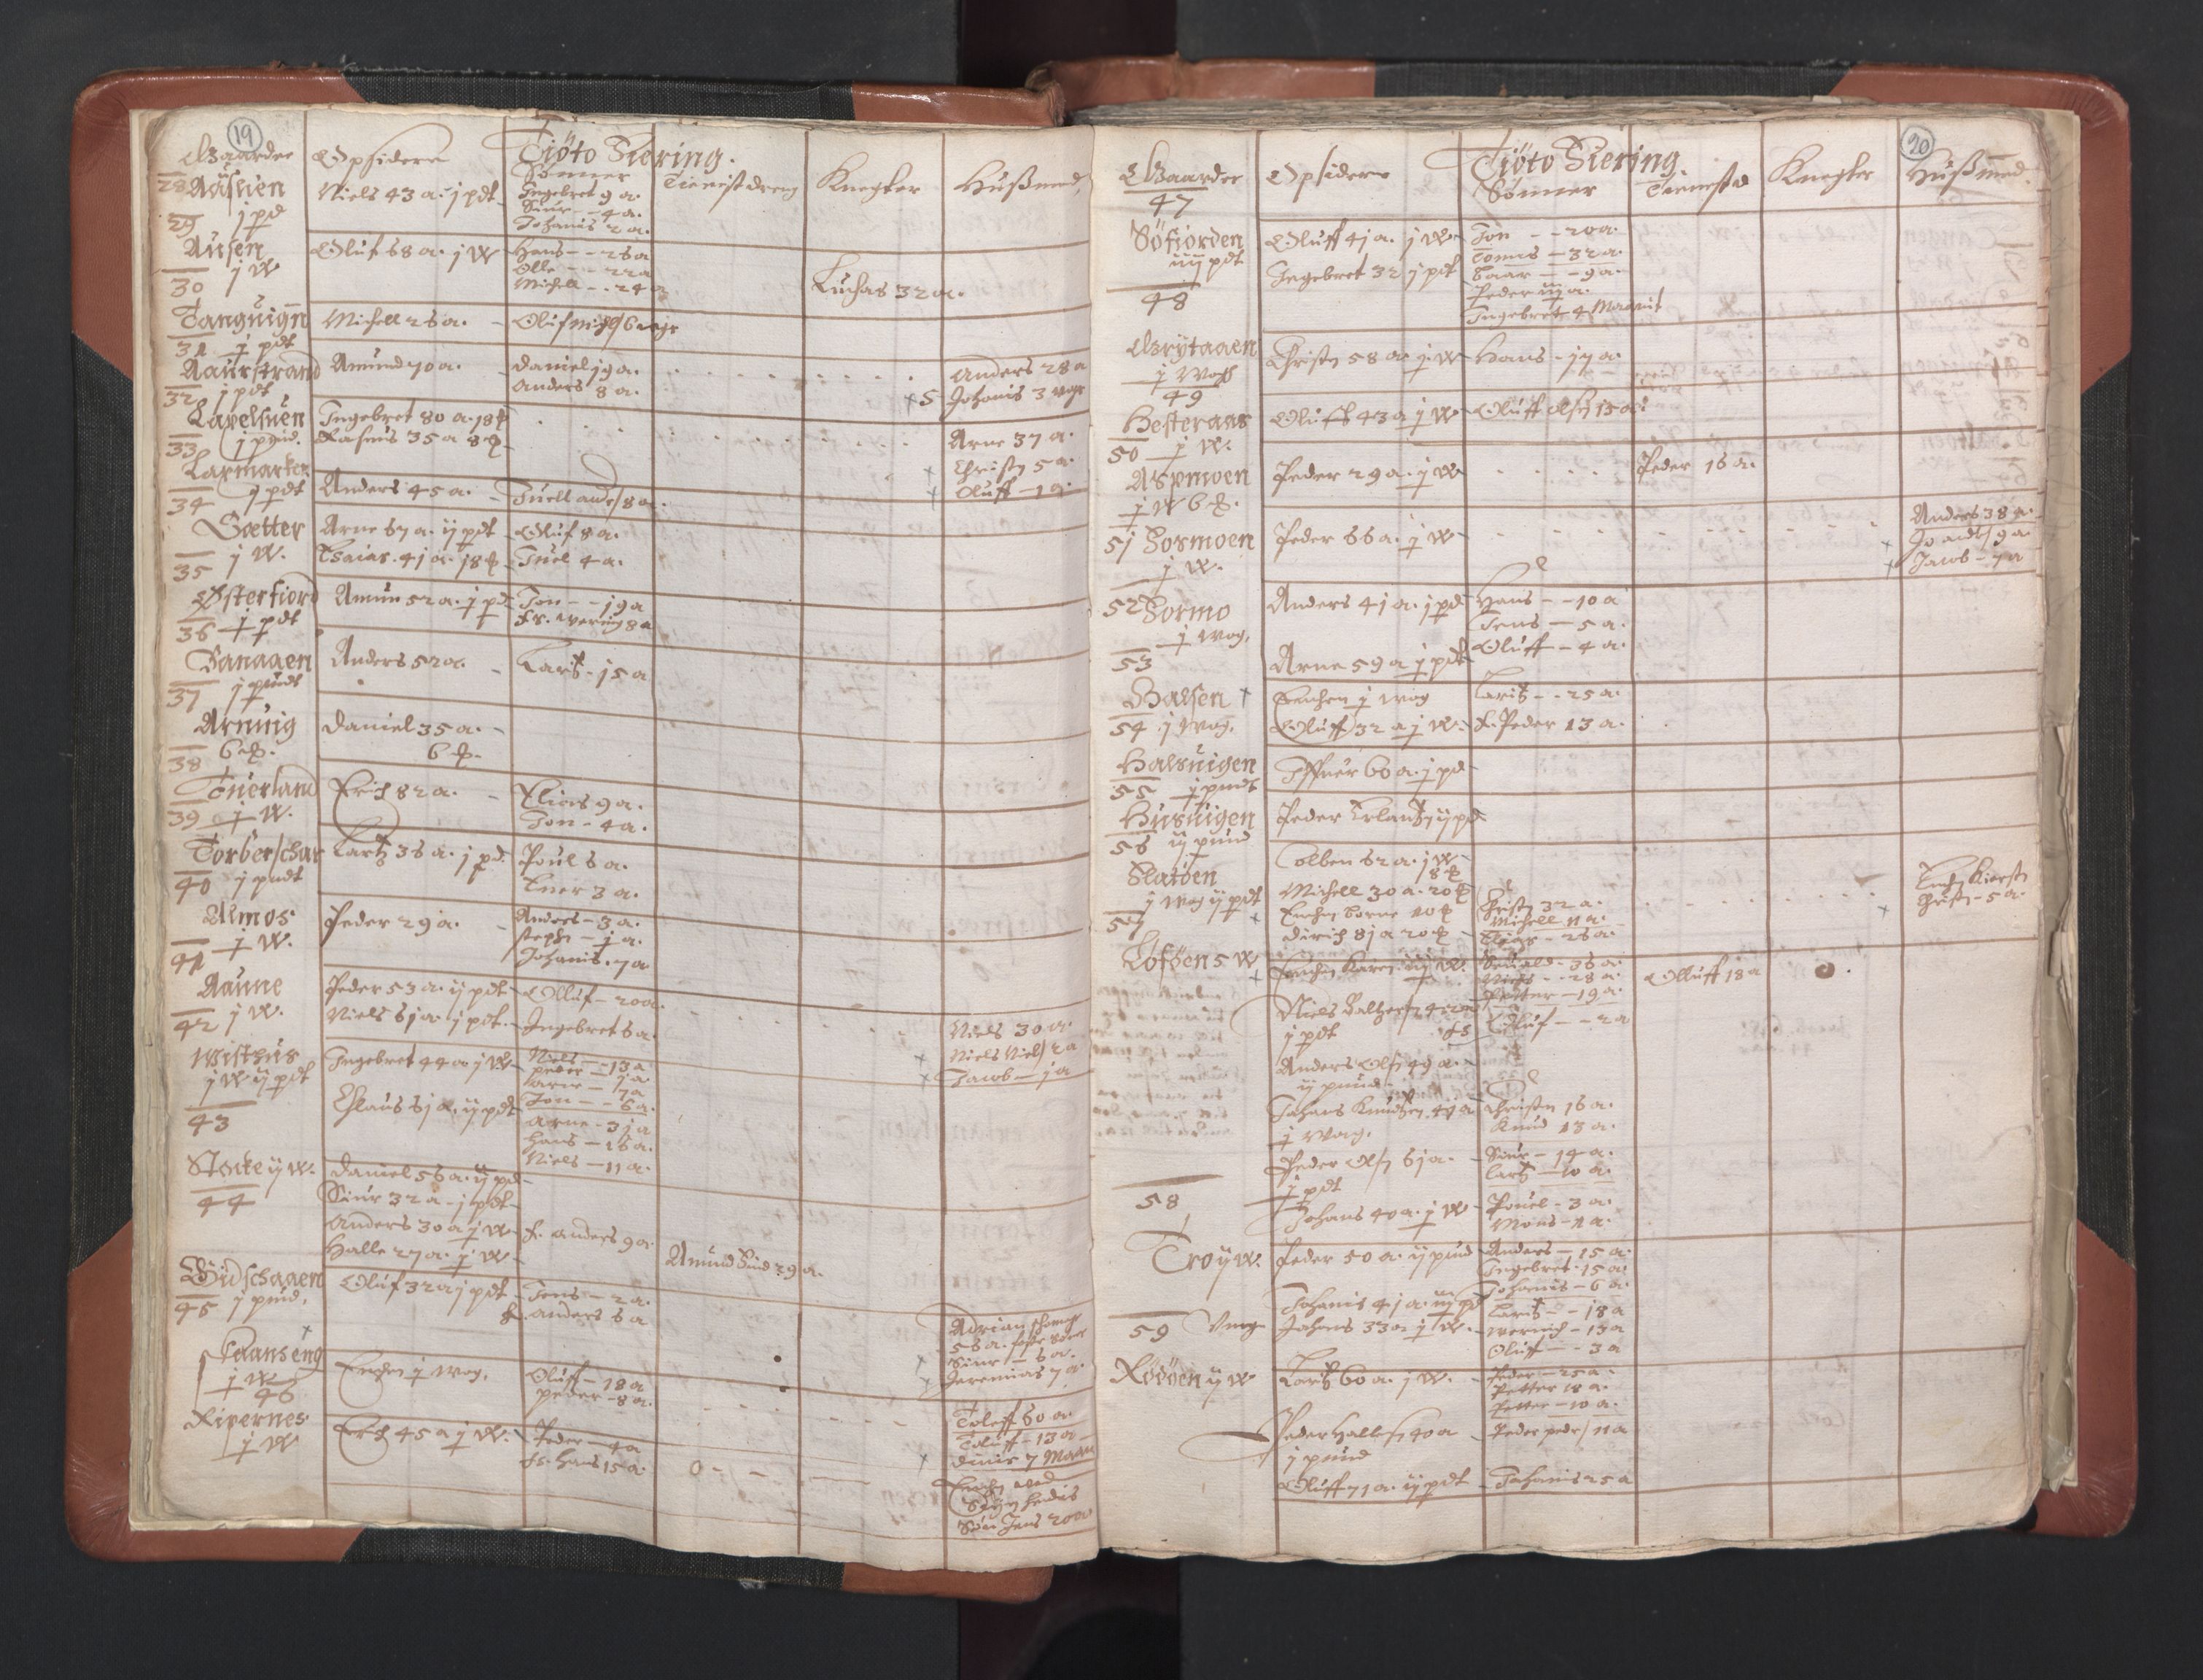 RA, Vicar's Census 1664-1666, no. 35: Helgeland deanery and Salten deanery, 1664-1666, p. 19-20